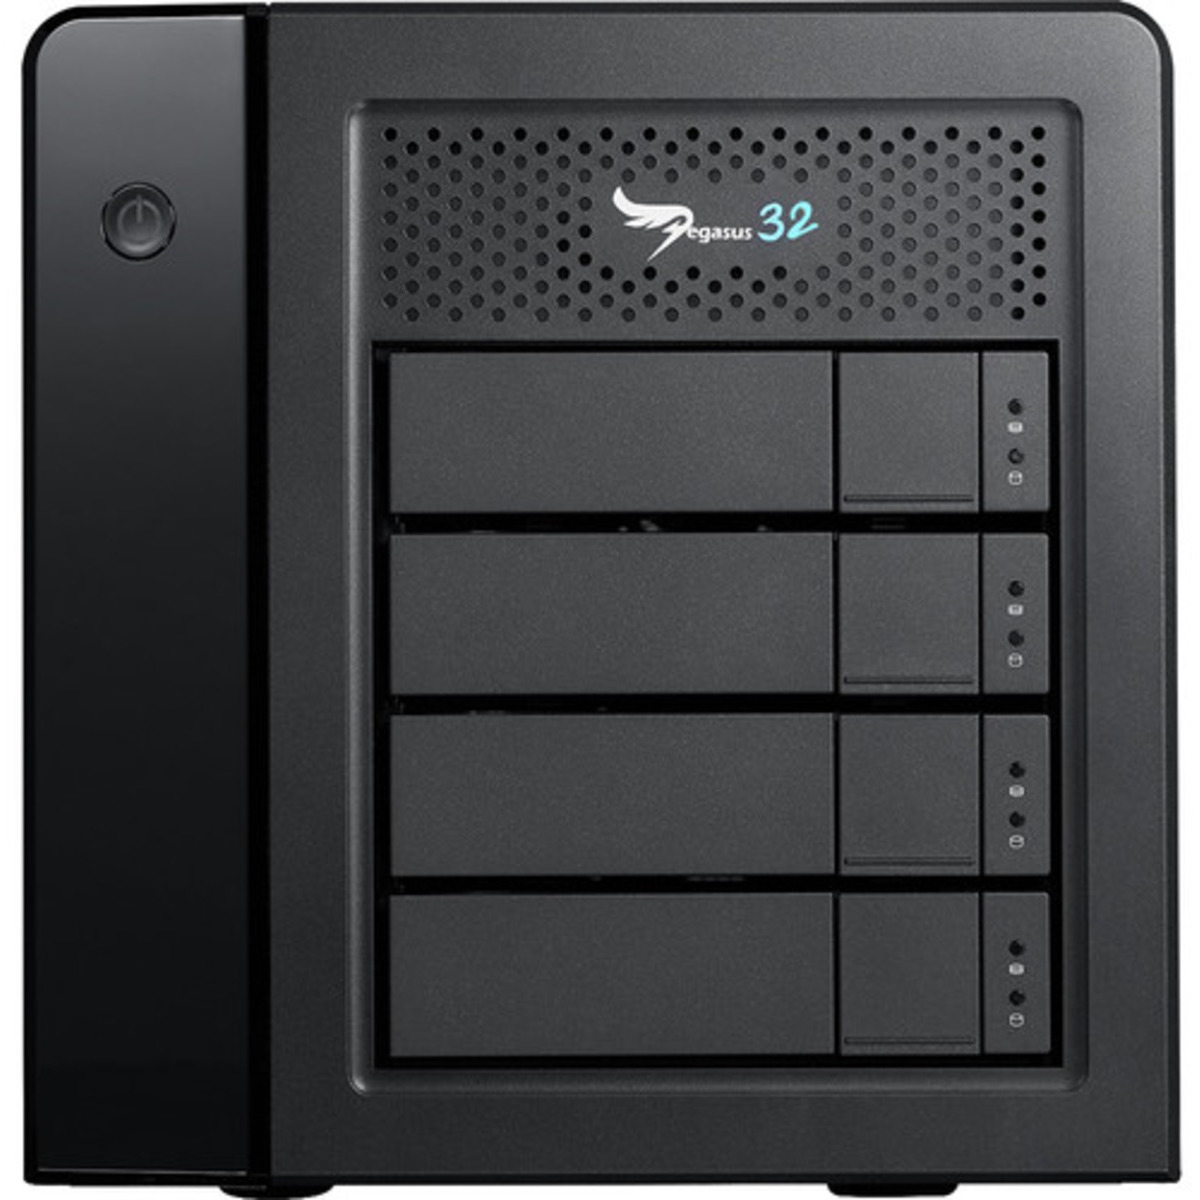 Promise Technology Pegasus32 R4 Thunderbolt 3 32tb 4-Bay Desktop Multimedia / Power User / Business DAS - Direct Attached Storage Device 4x8tb Western Digital Red Pro WD8003FFBX 3.5 7200rpm SATA 6Gb/s HDD NAS Class Drives Installed - Burn-In Tested Pegasus32 R4 Thunderbolt 3